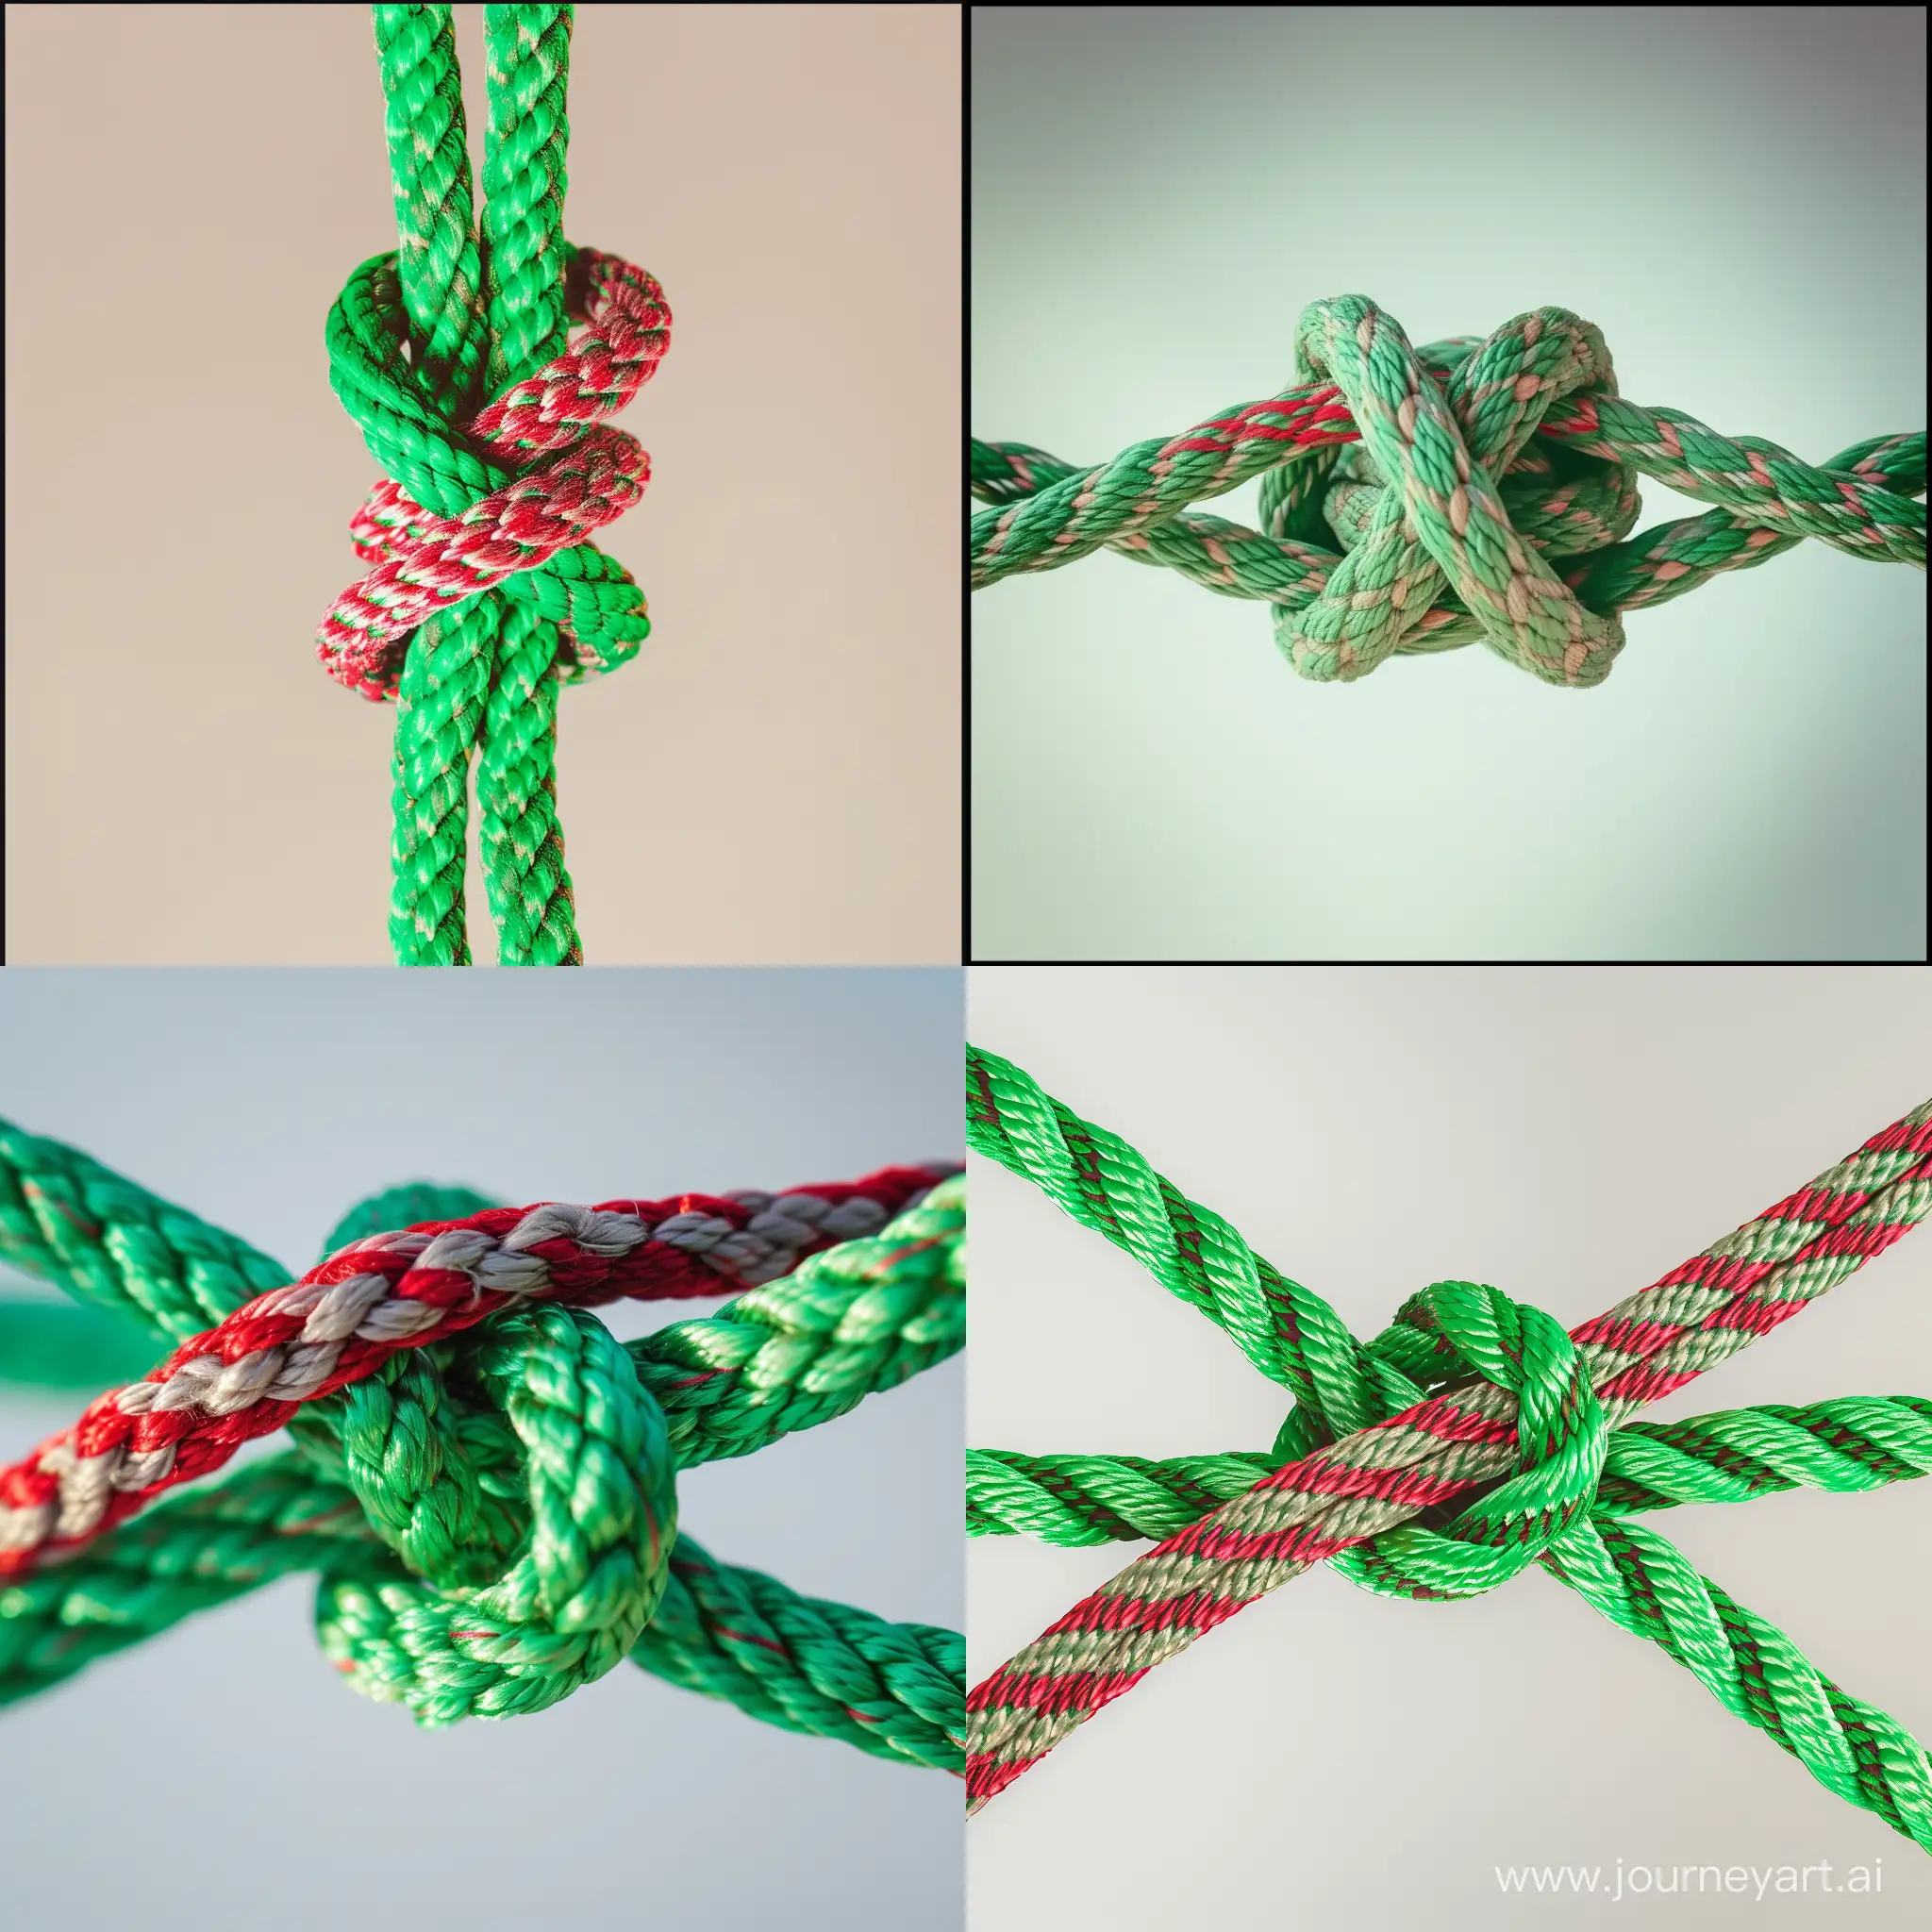 two green and red ropes tied into a knot, light background